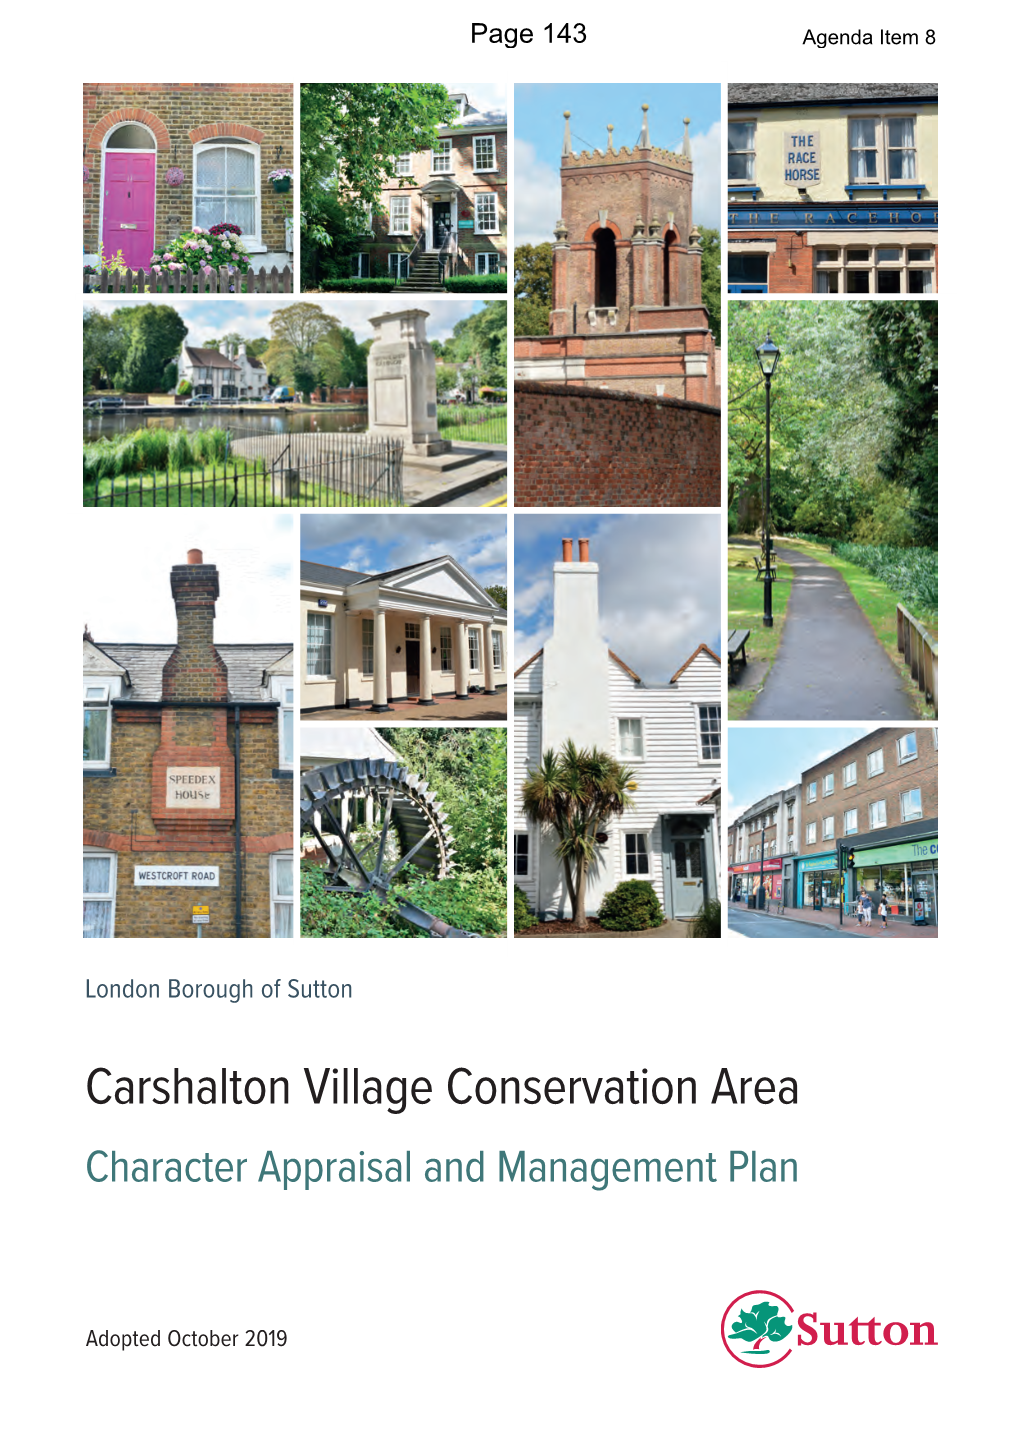 Carshalton Village Conservation Area Character Appraisal and Management Plan